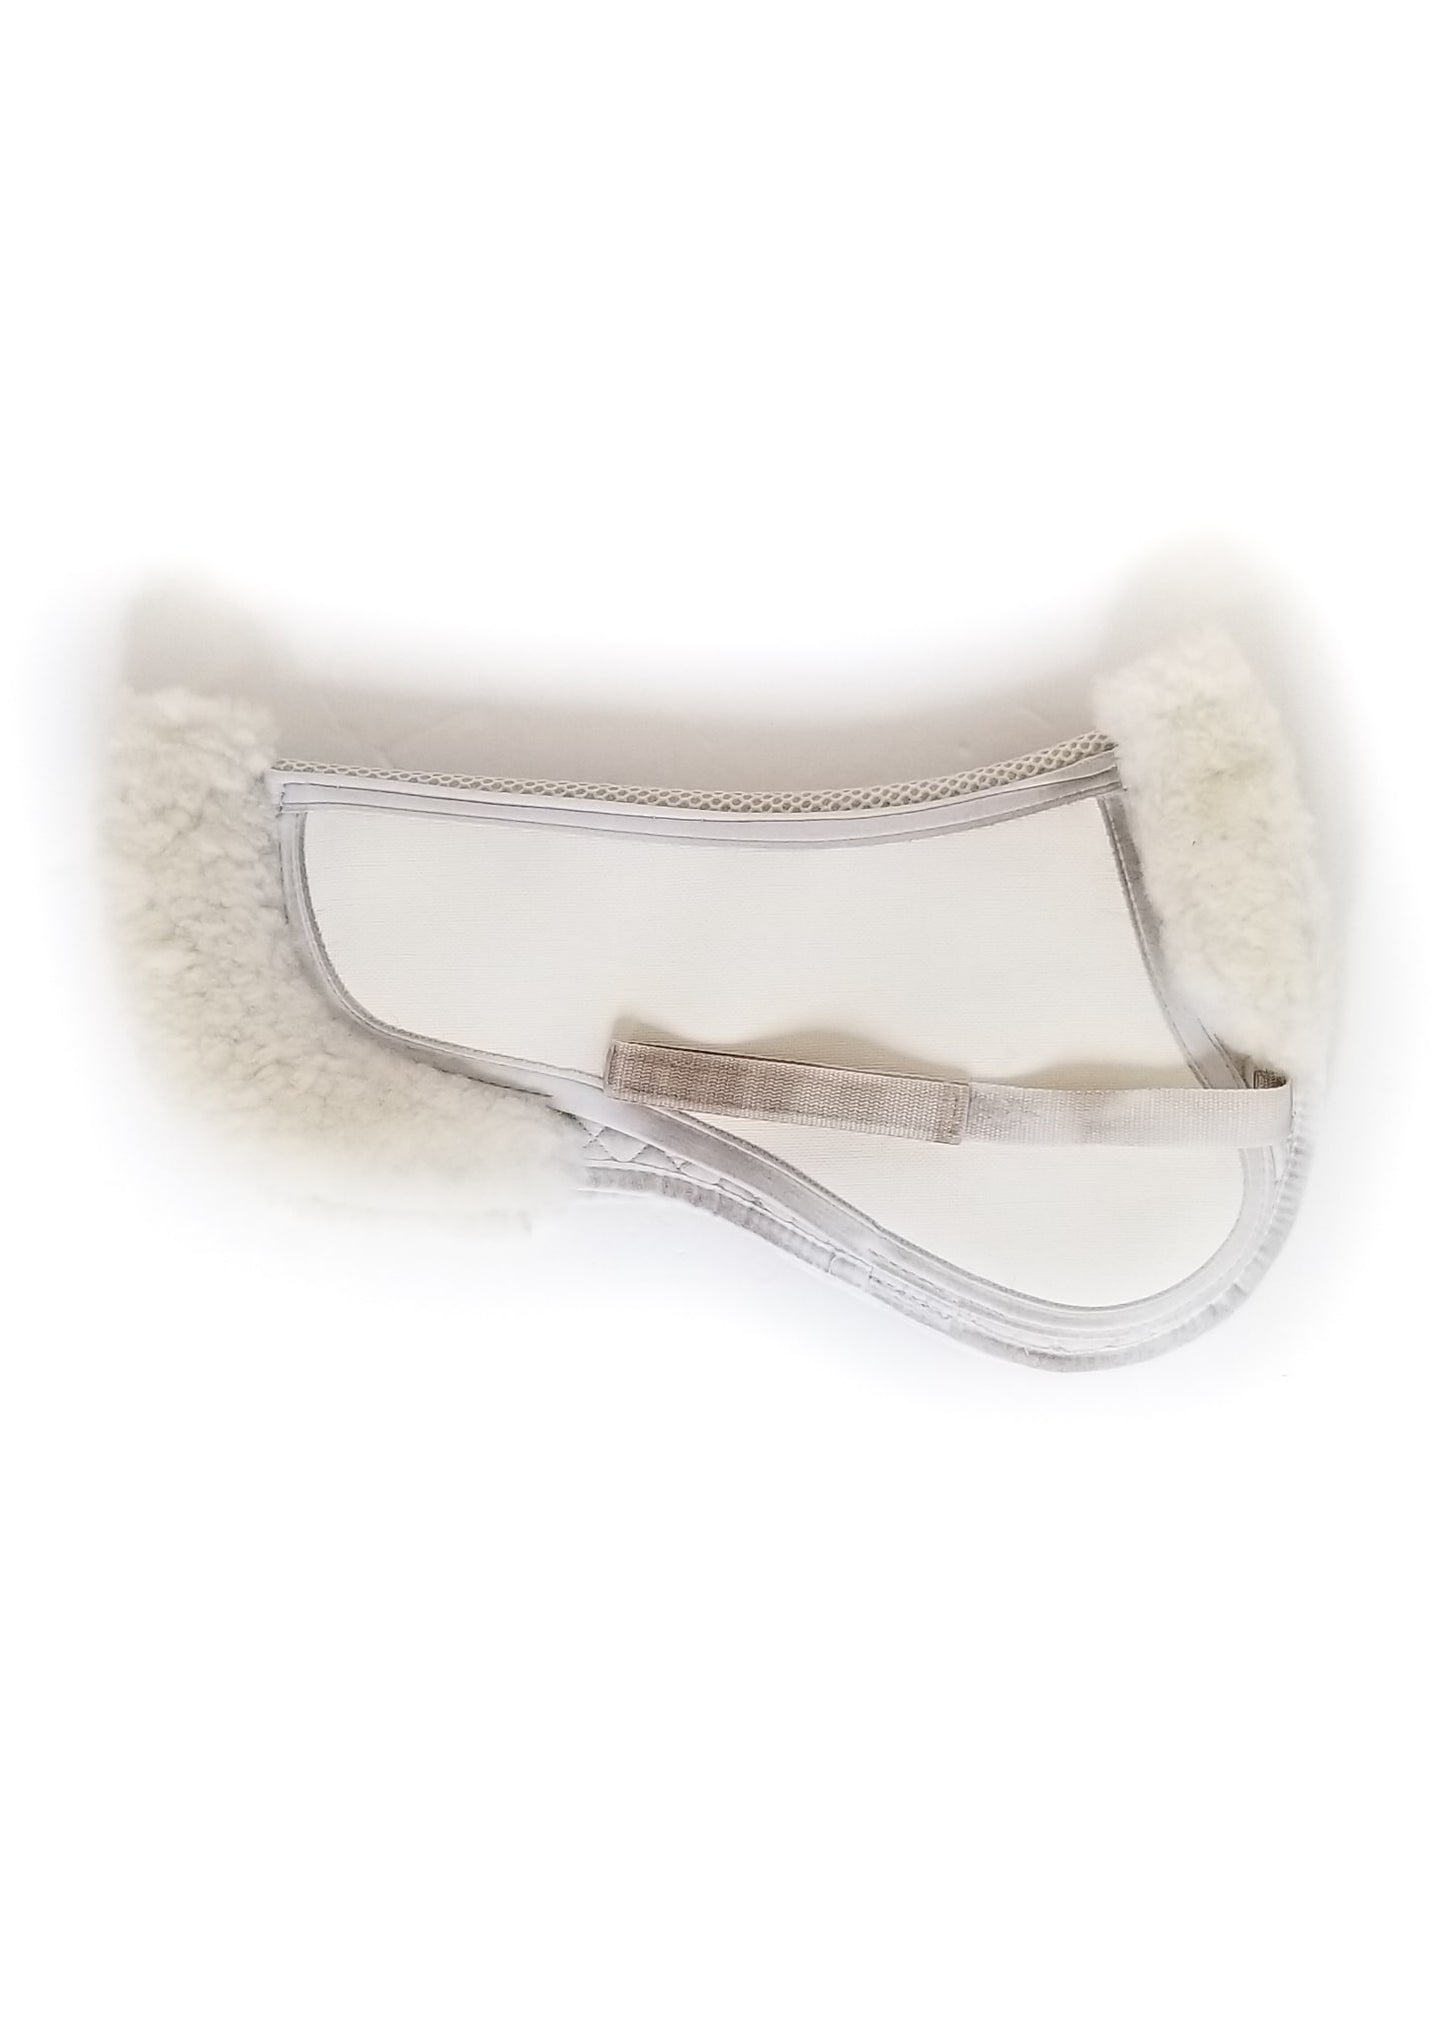 Thinline Trifecta Half Pad with Sheepskin Rolls (Shimable) - White - Small